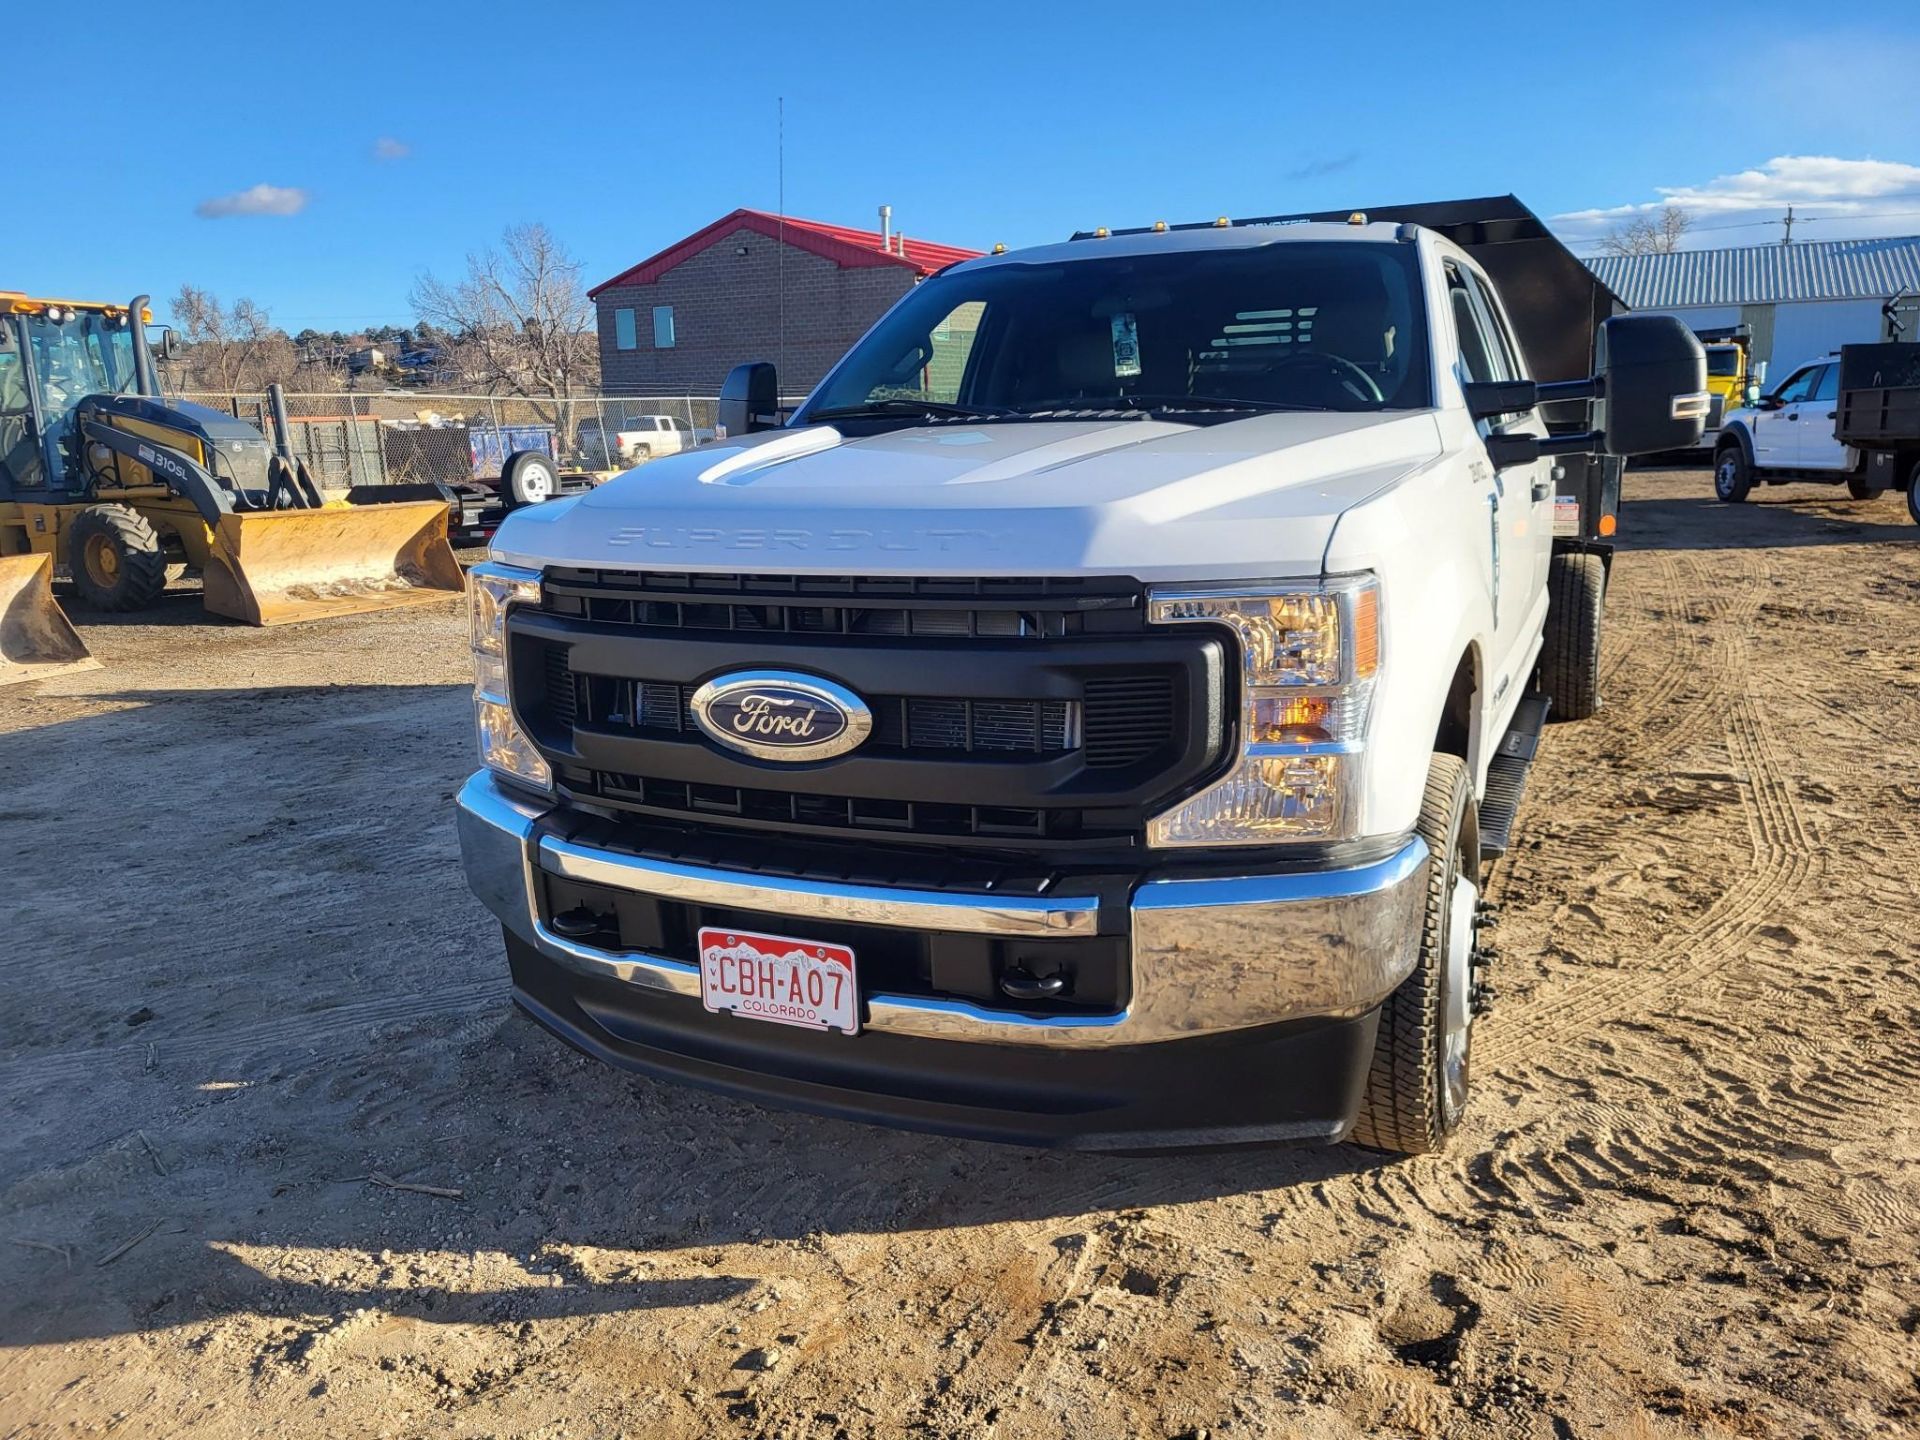 2021 FORD F350 CREW CAB DUALLY DIESEL FLATBED DUMP TRUCK 19,500 MILES! - Image 2 of 37